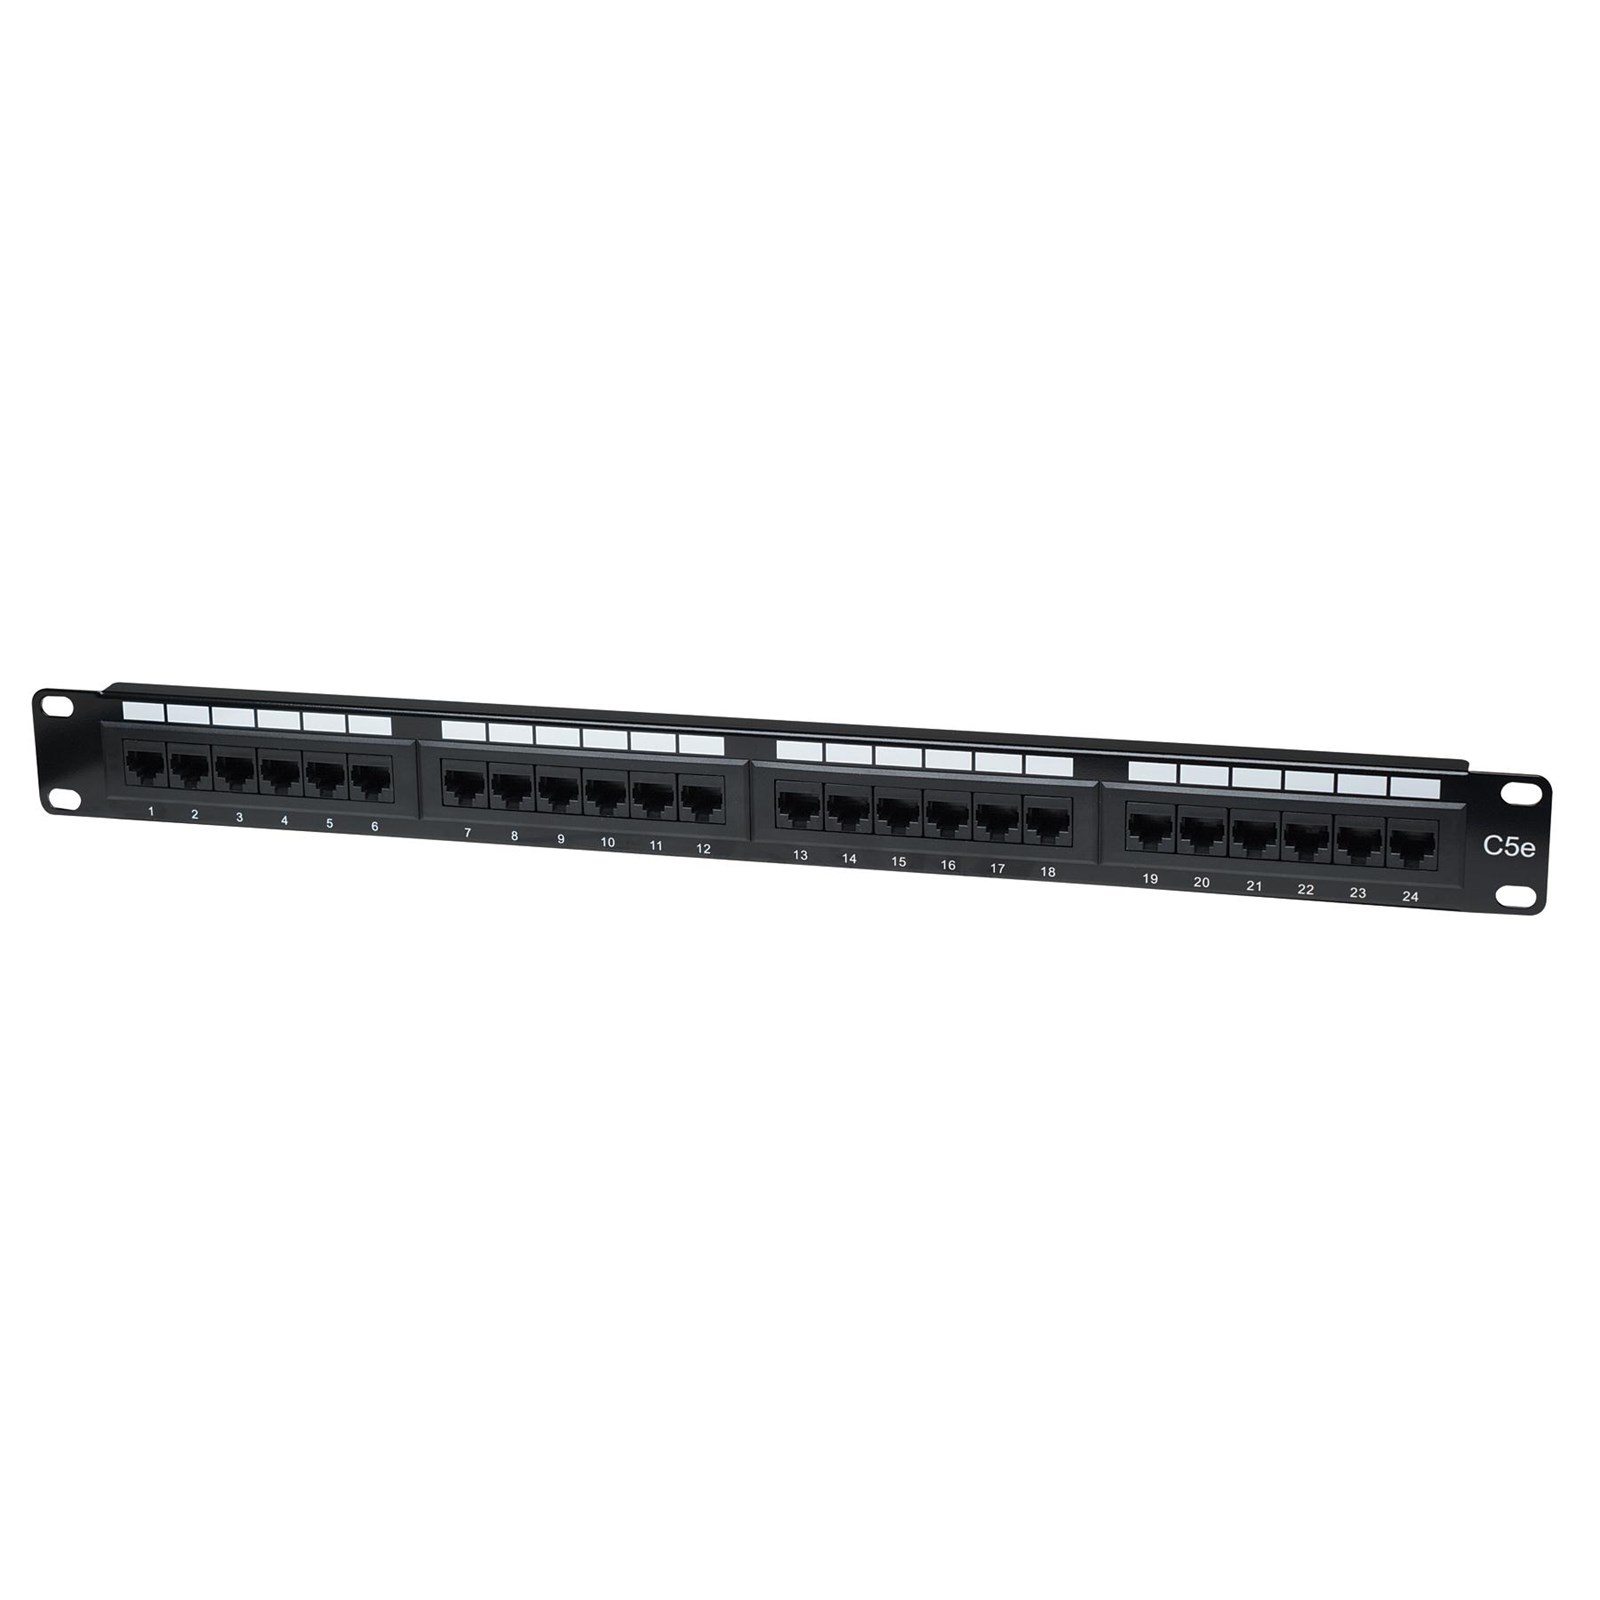 Photos - Other network equipment INTELLINET Cat5e Patch Panel 513555 